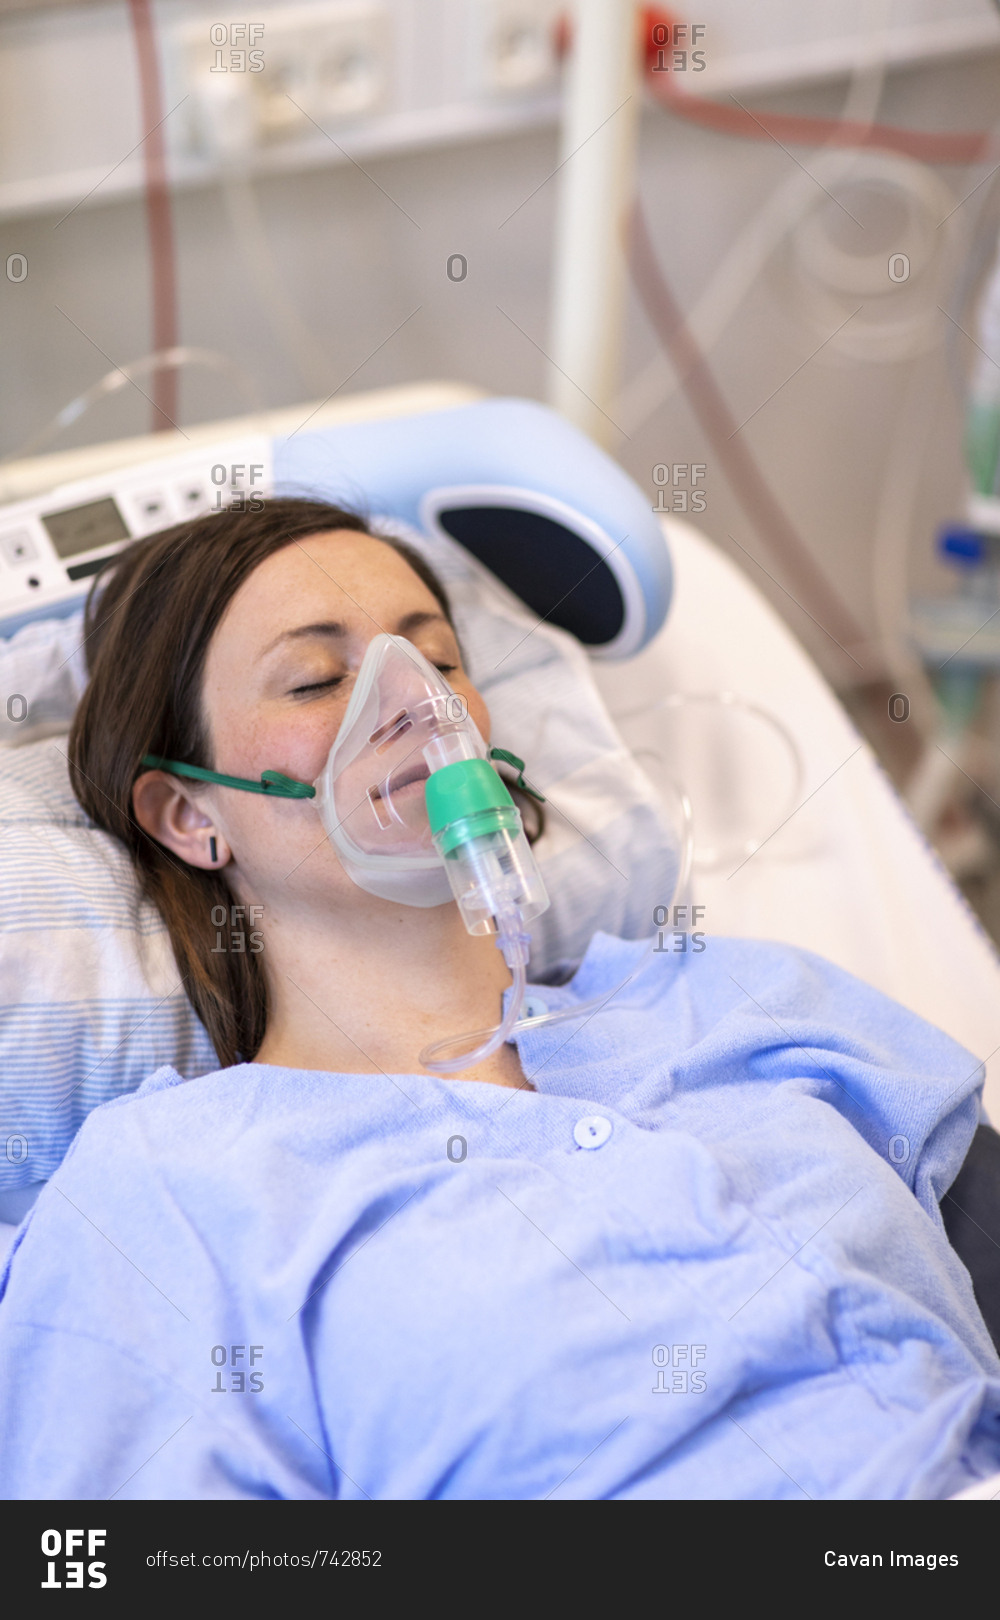 High Angle View Of Patient Wearing Oxygen Mask While Sleeping On Bed In Hospital Stock Photo